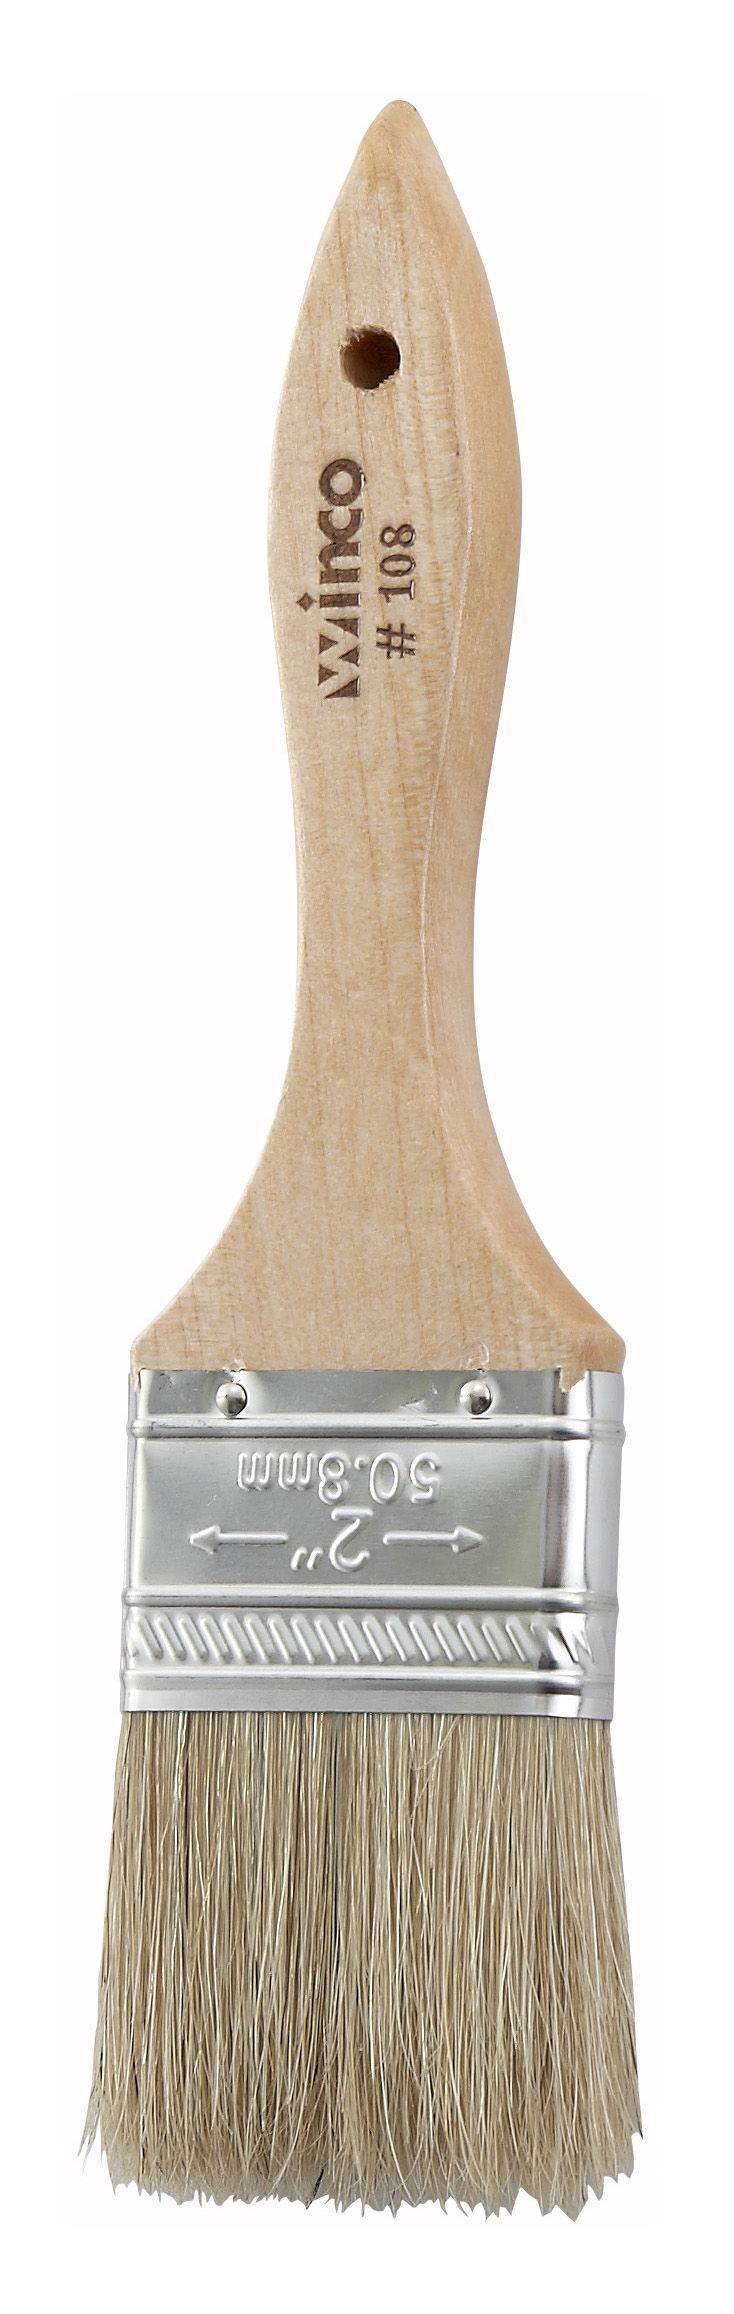 Winco WBR-20 2" Wide Flat Pastry Brush with Wooden Handle